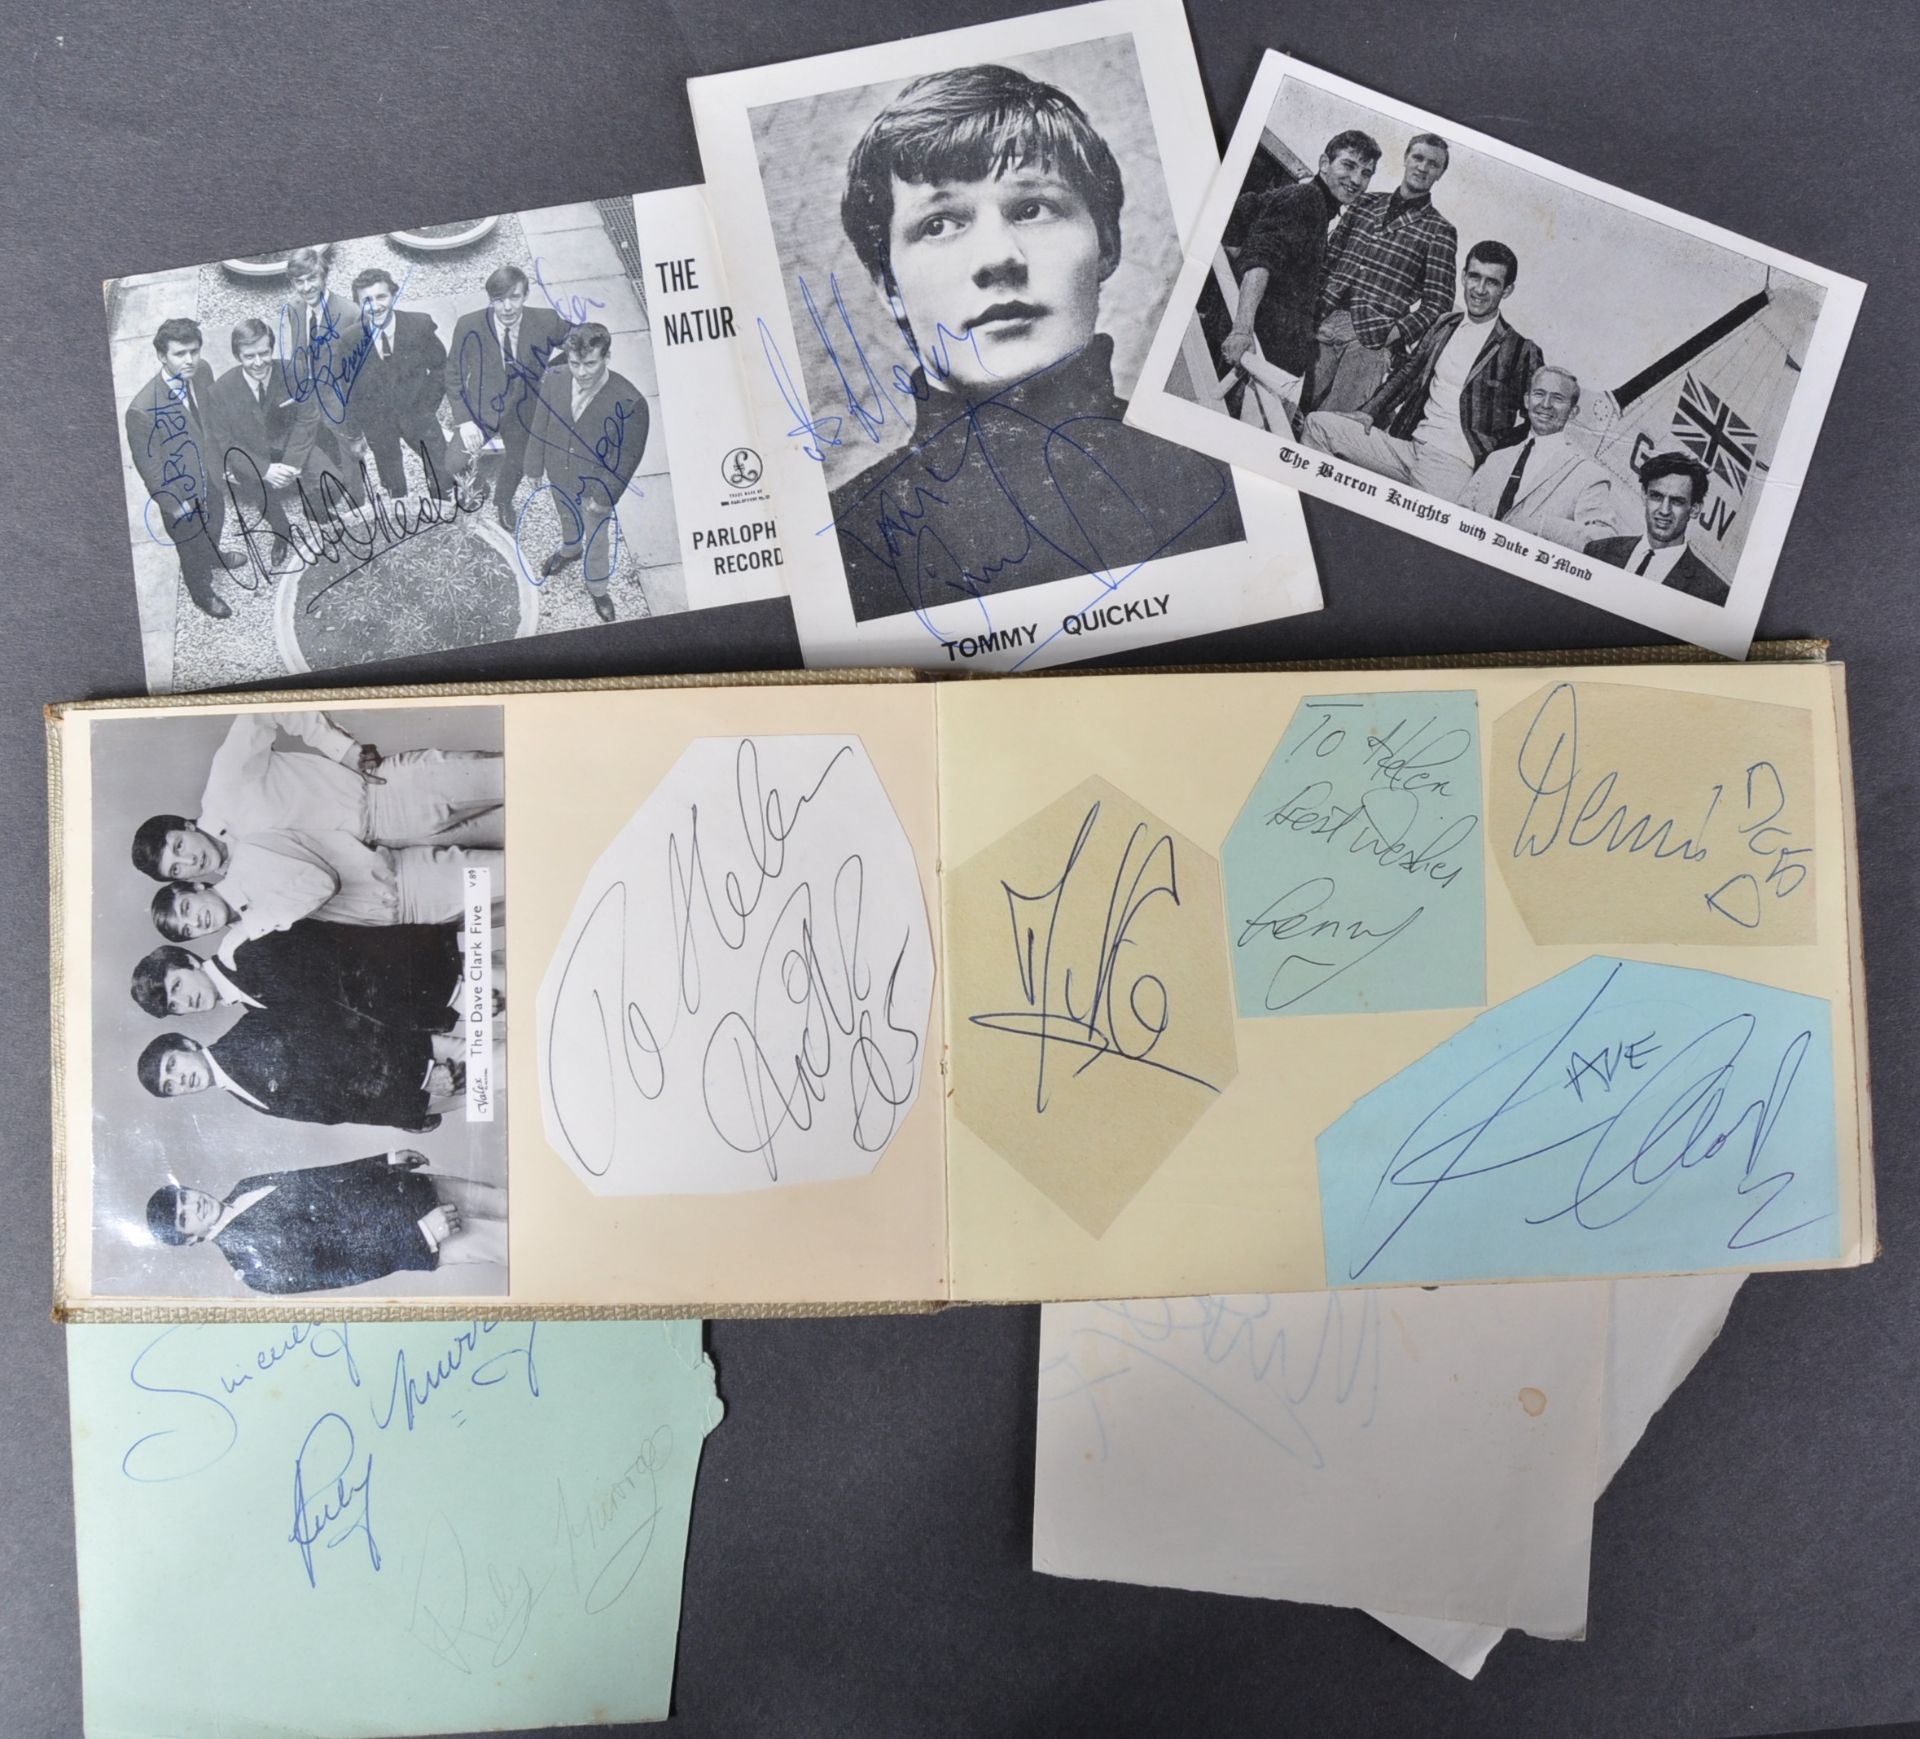 1960S MUSIC AUTOGRAPH ALBUMS - OBTAINED FROM DISCS-A-GOGO - Image 20 of 31